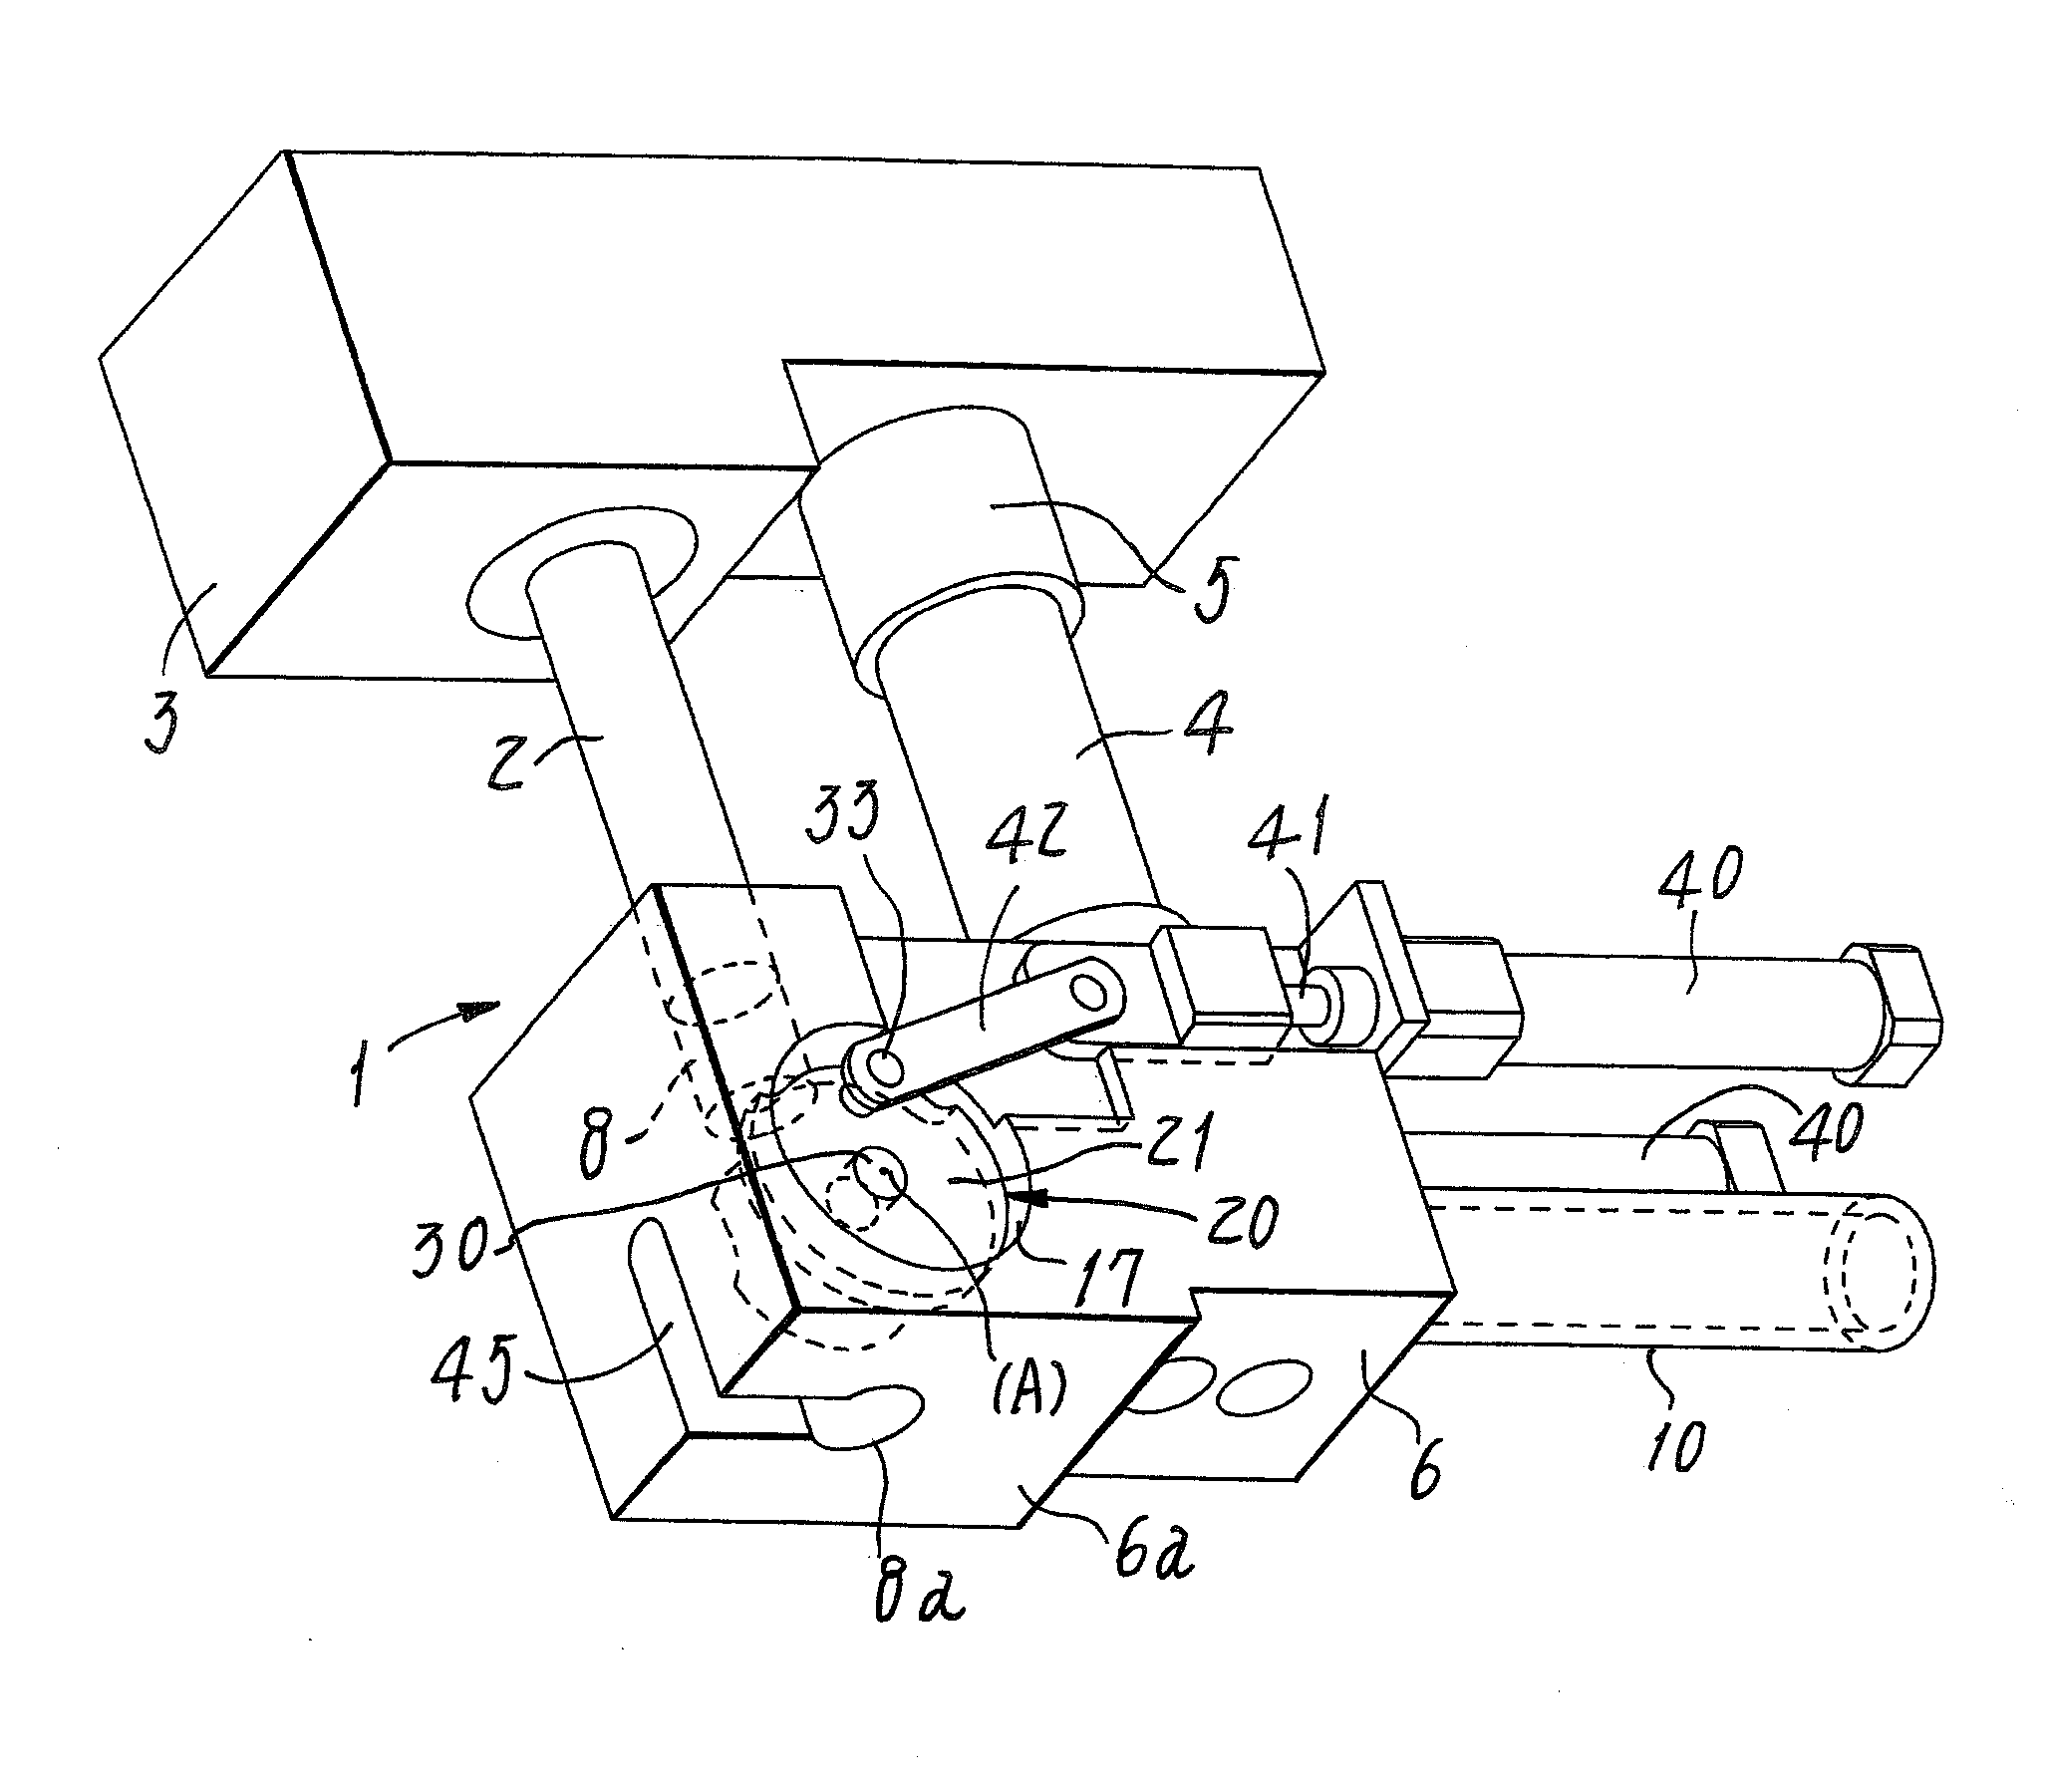 Apparatus for aligned supply of fastening parts